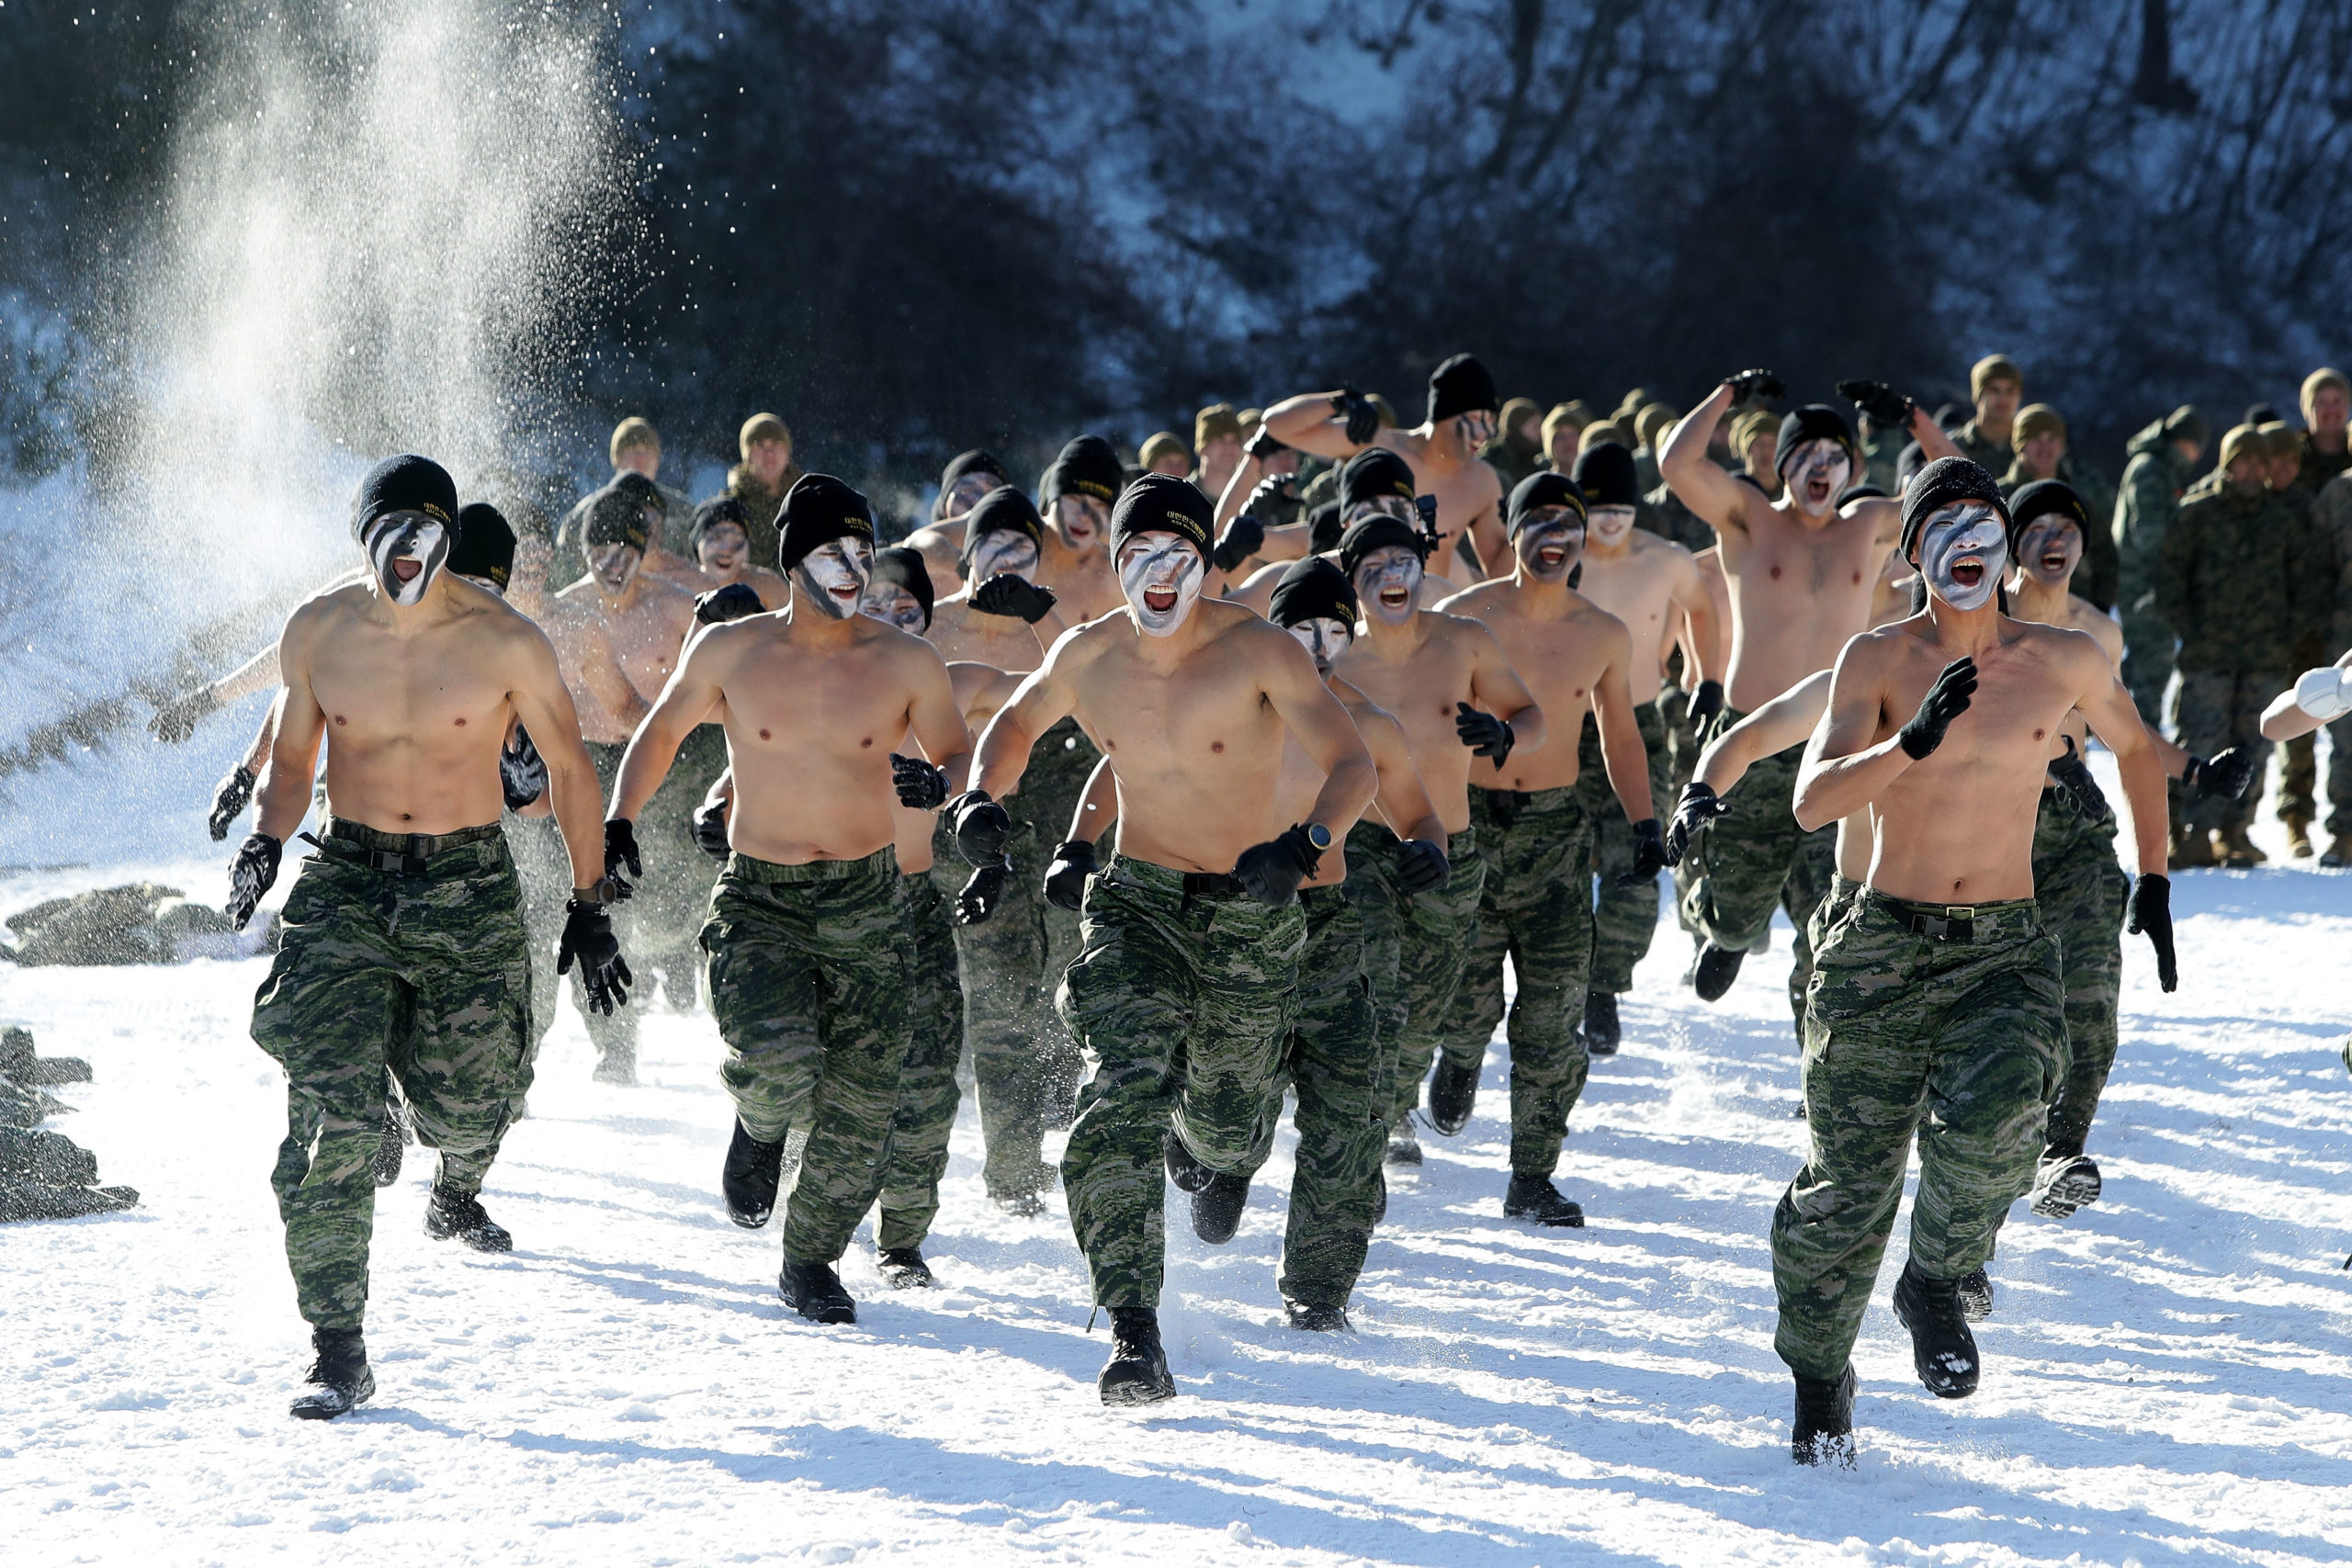 PYEONGCHANG-GUN, SOUTH KOREA - DECEMBER 19: U.S. Marines from 3rd Marine Expeditionary force deployed from Okinawa, Japan, participate in the winter military training exercise with South Korean marine on December 19, 2017 in Pyeongchang-gun, South Korea. U.S. and South Korean marines participate in the endurance exercise in temperature below minus 20 degrees celsius under a scenario to defend the country from any possible attacks from North Korea. 